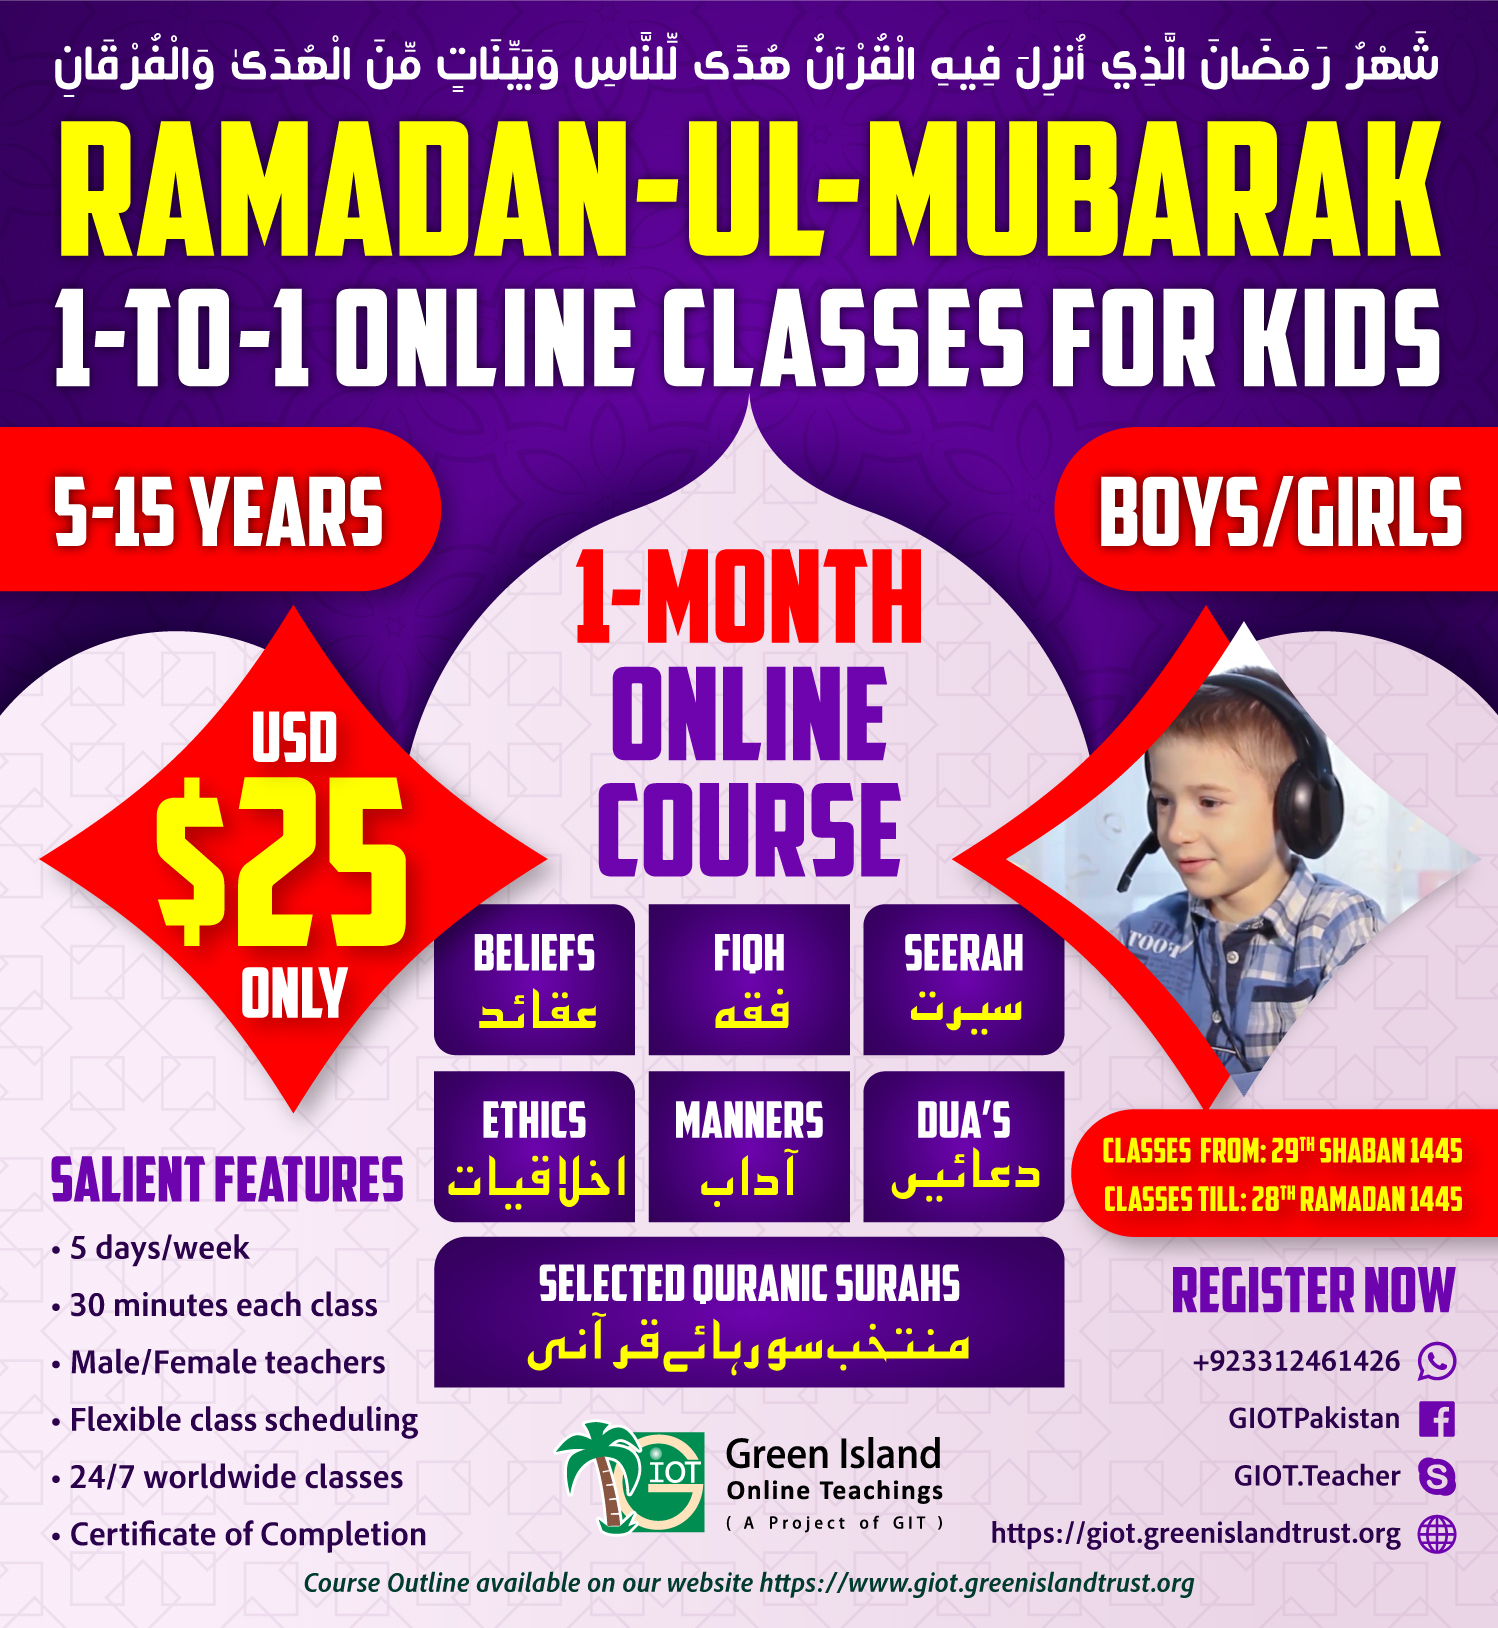 Ramadan Course: 1-on-1 Online Classes for Kids.